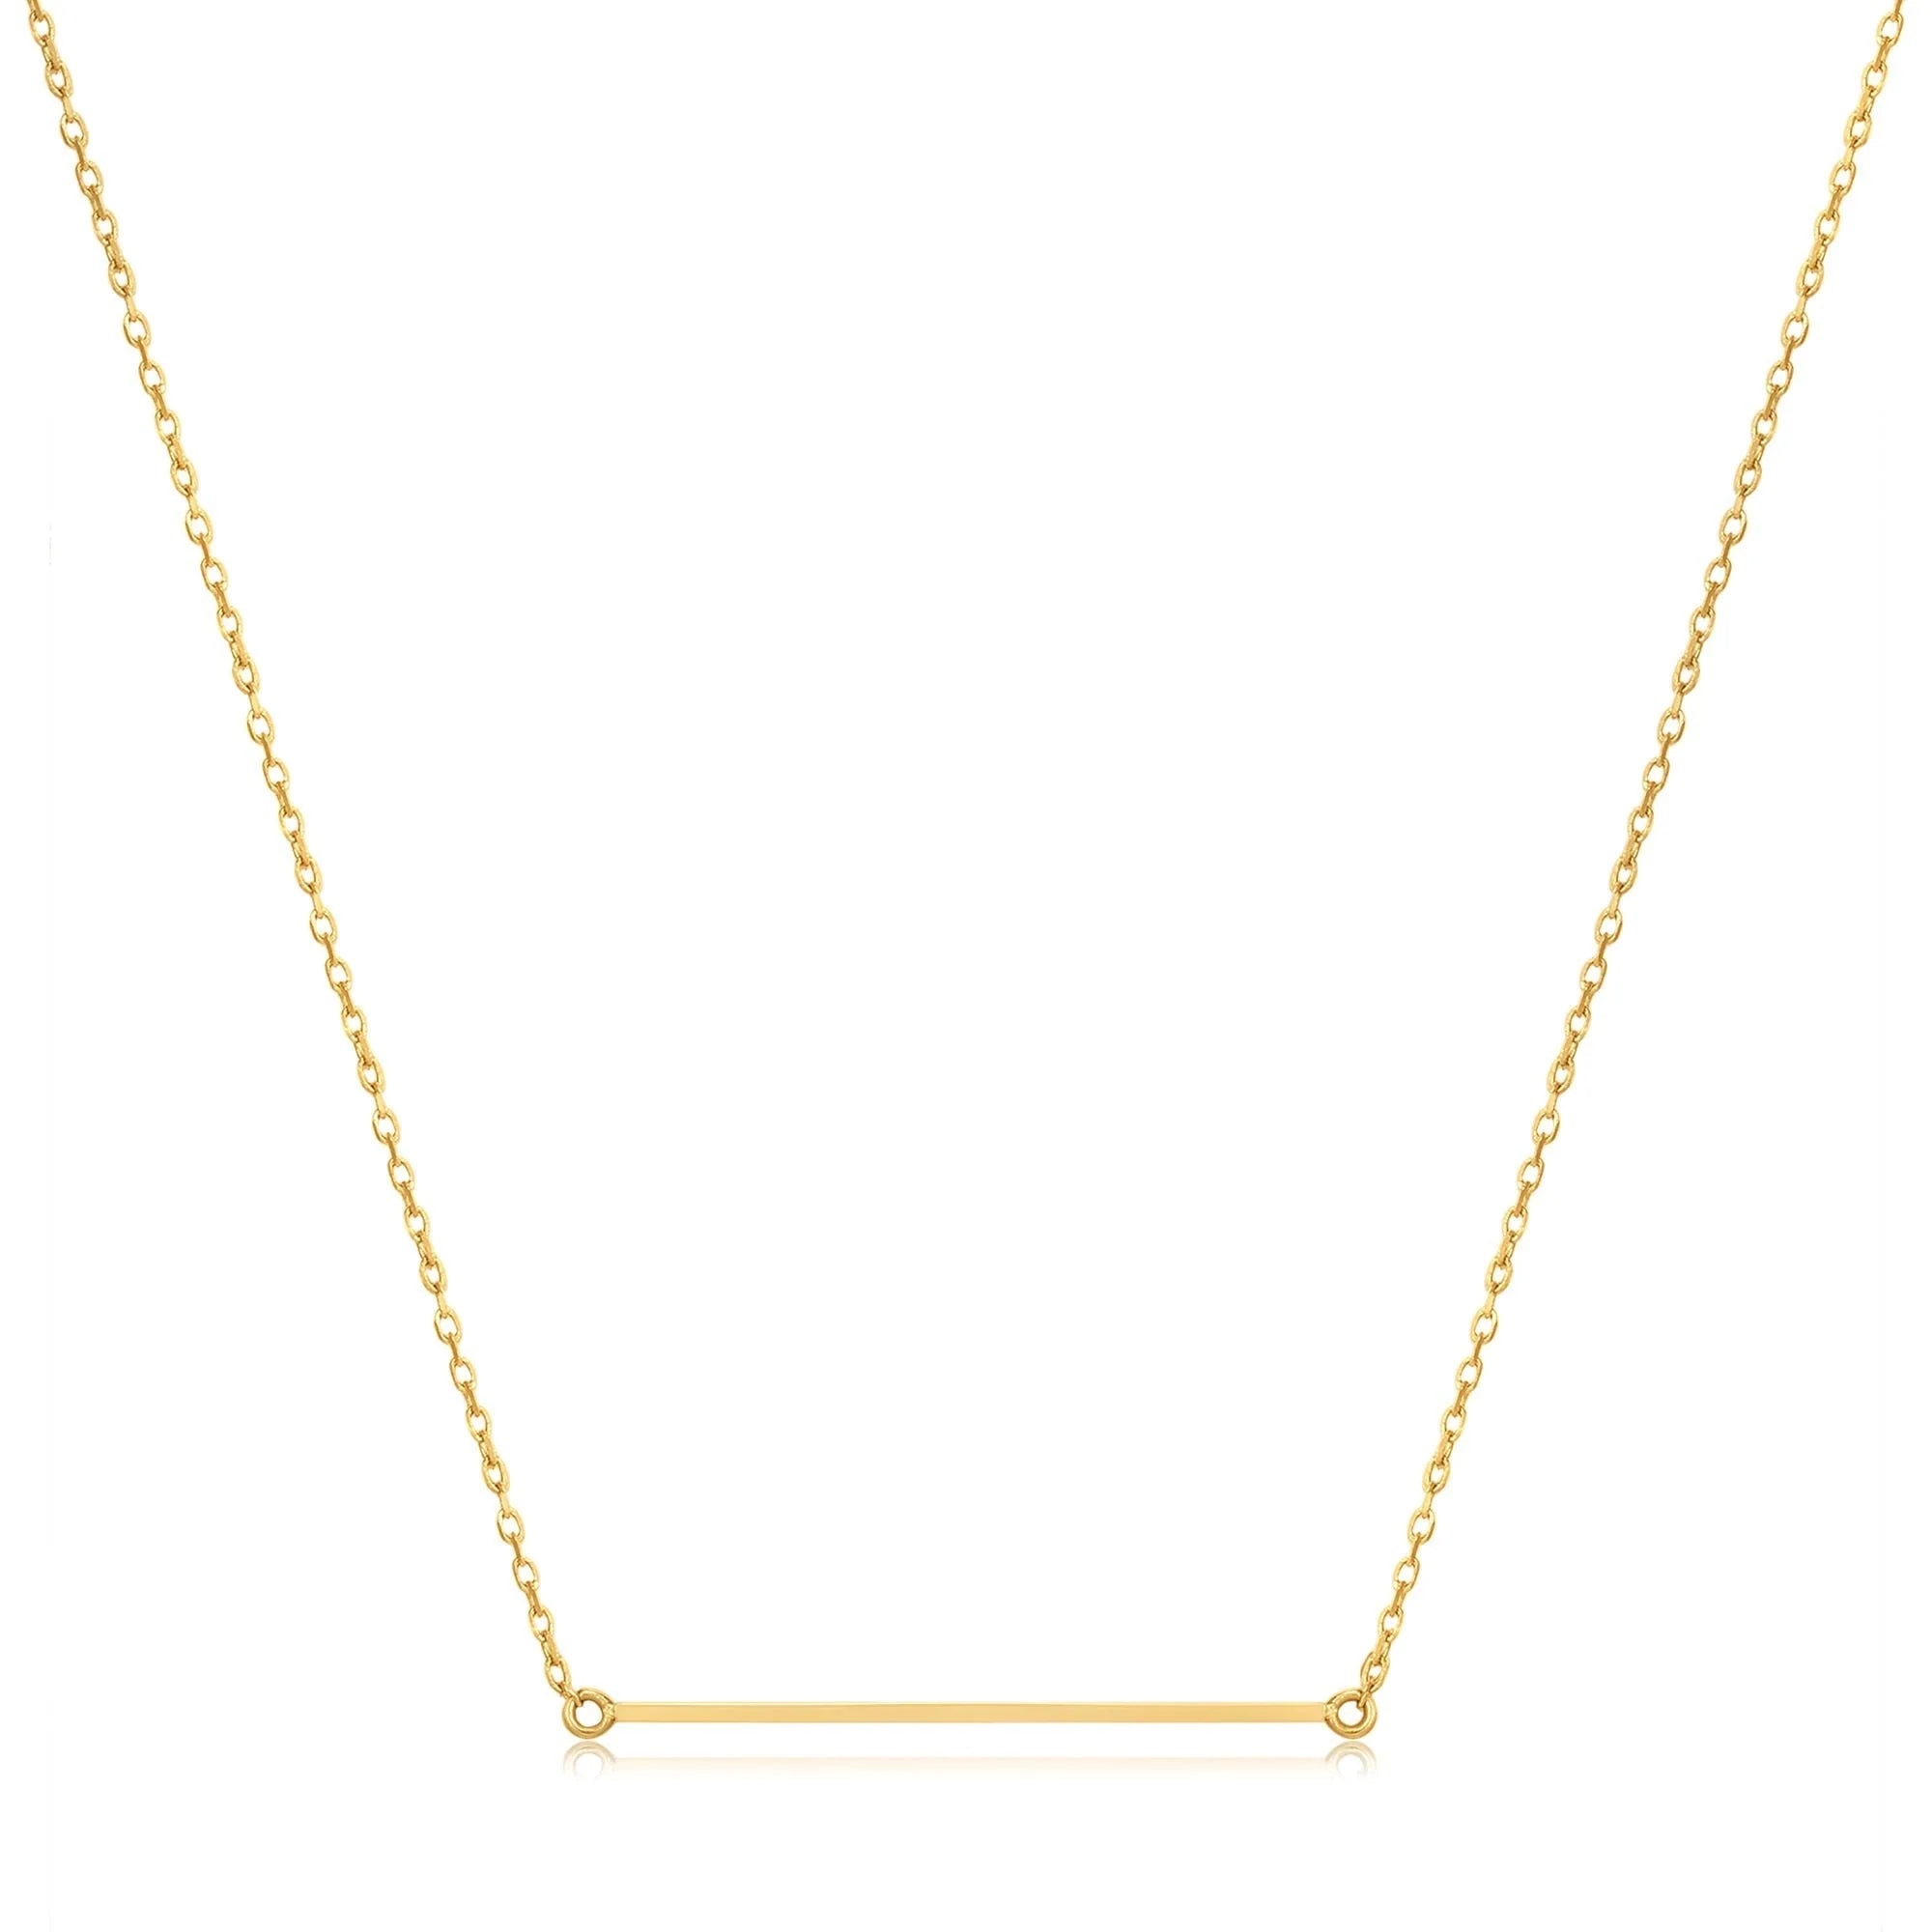 Ania Haie 14kt Gold Solid Bar Necklace